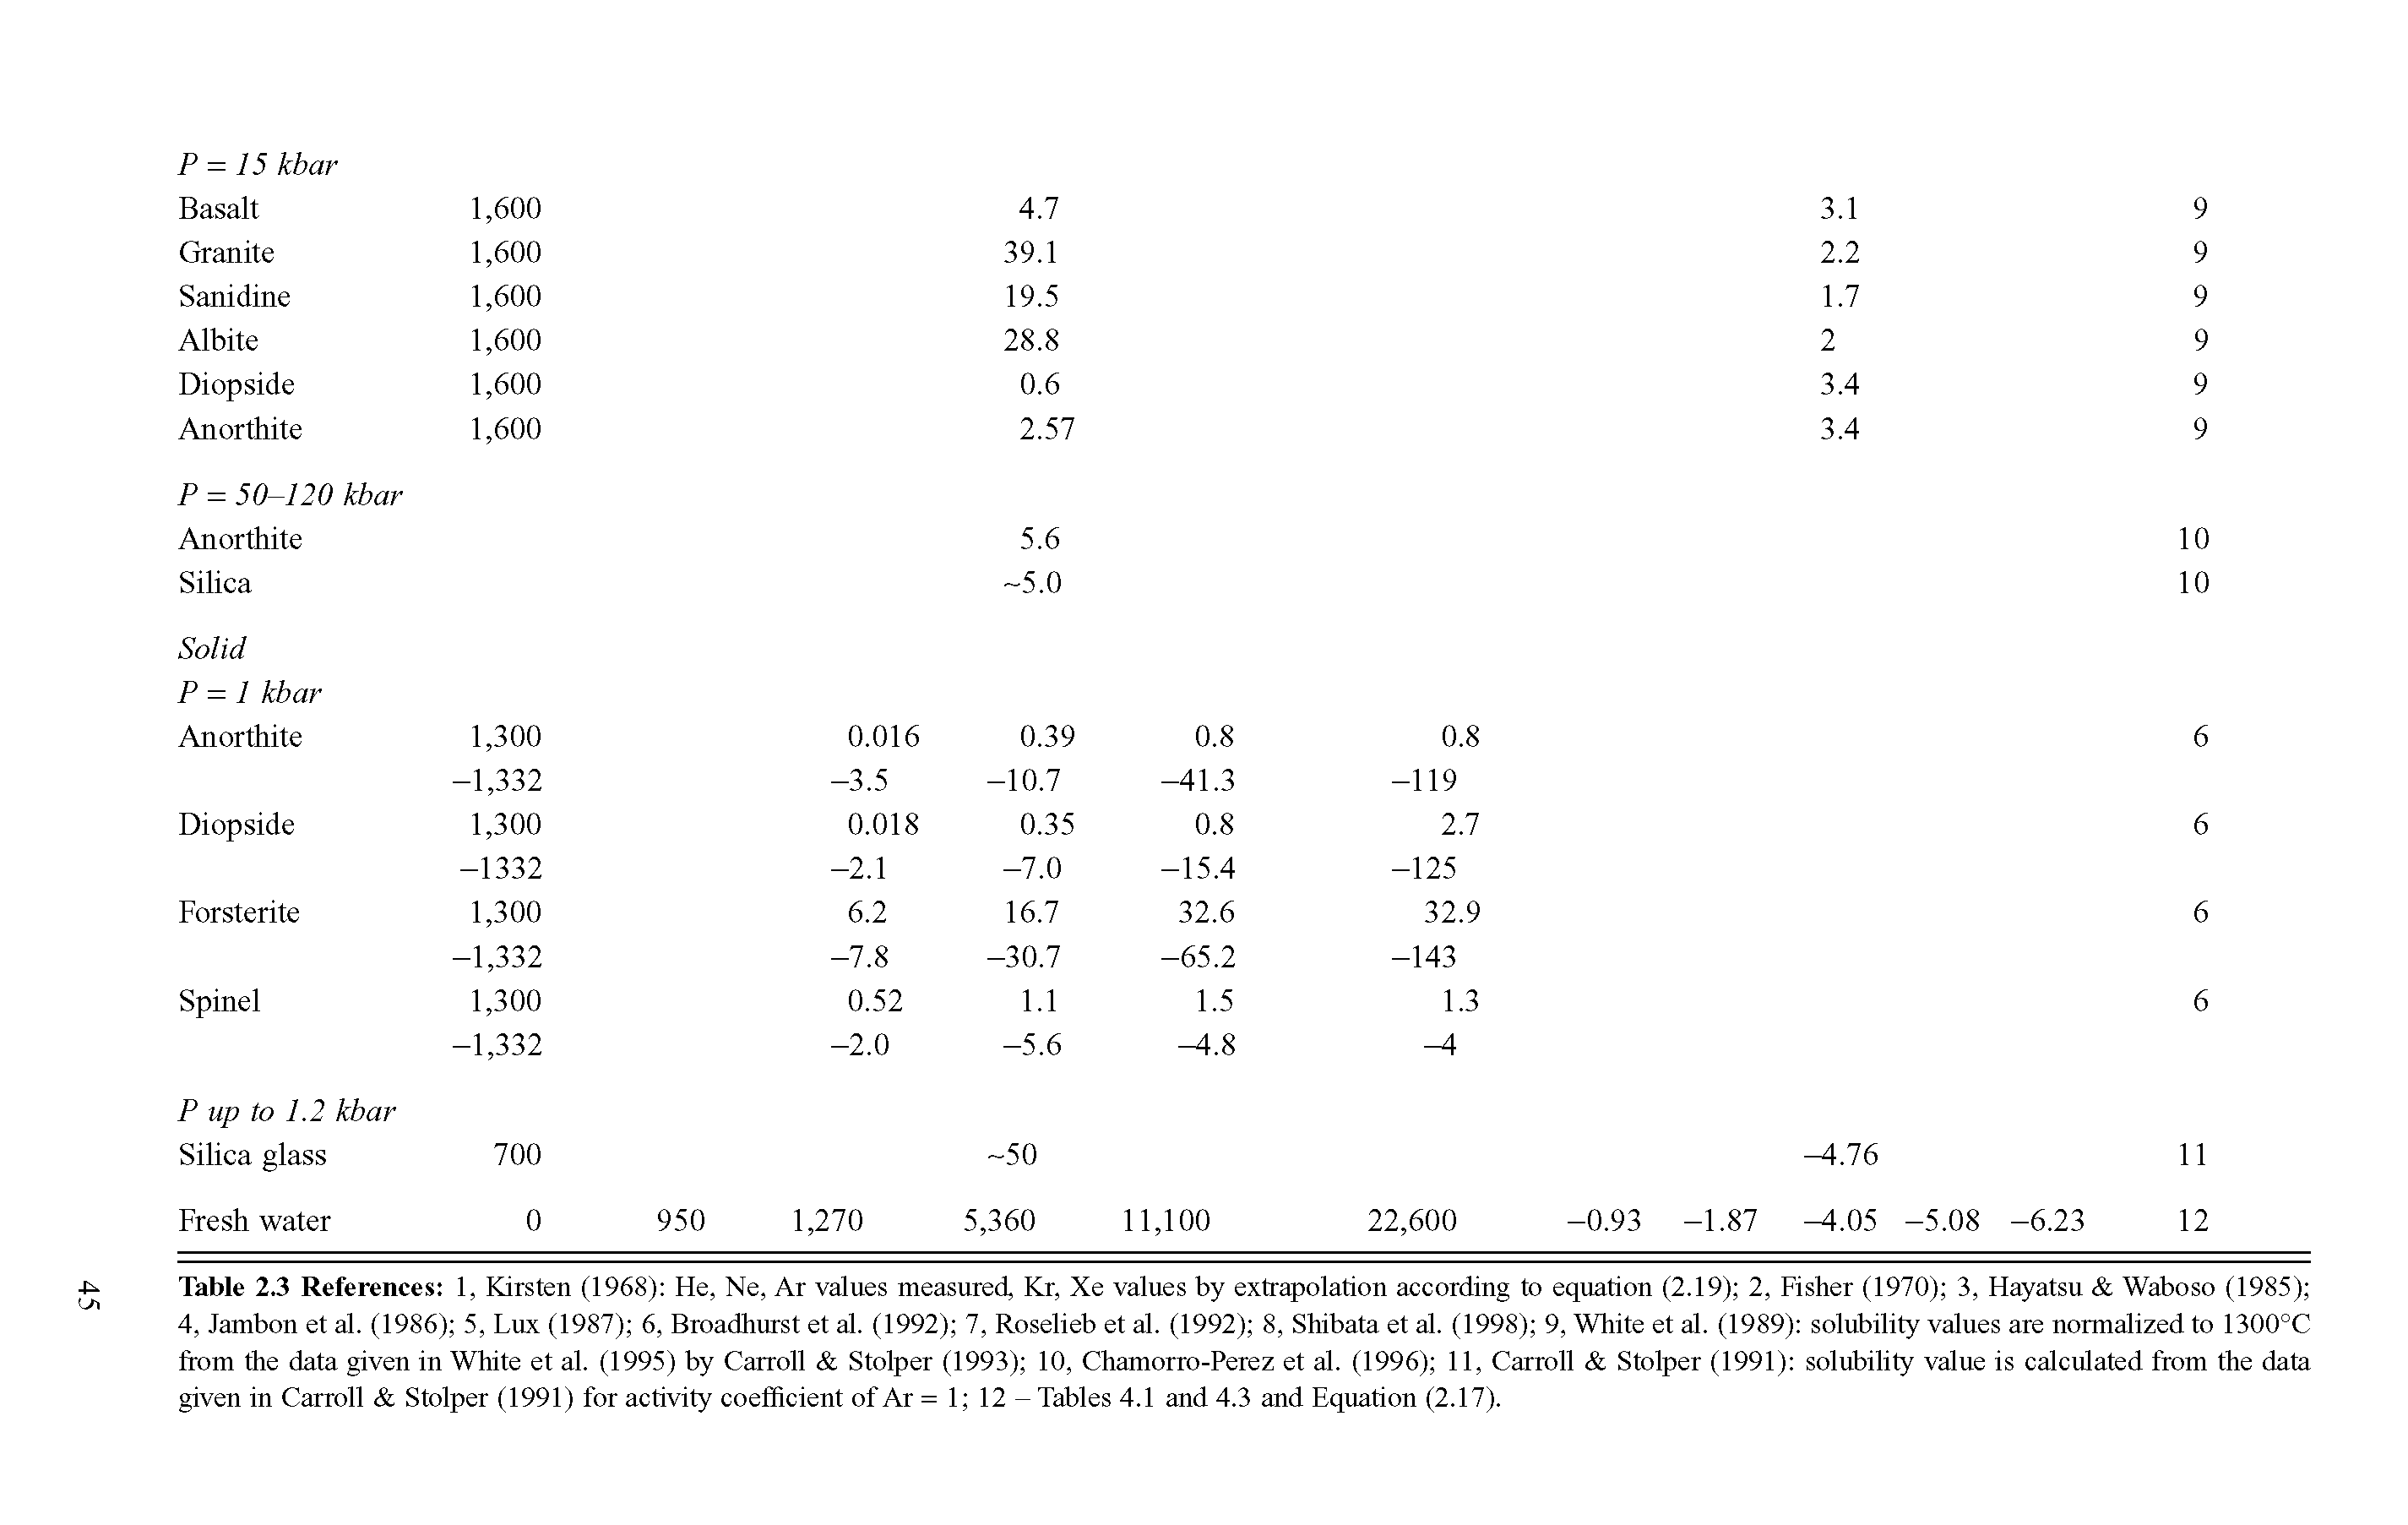 Table 2.3 References 1, Kirsten (1968) He, Ne, Ar values measured, Kr, Xe values by extrapolation according to equation (2.19) 2, Fisher (1970) 3, Hayatsu Waboso (1985) 4, Jambon et al. (1986) 5, Lux (1987) 6, Broadhurst et al. (1992) 7, Roselieb et al. (1992) 8, Shibata et al. (1998) 9, White et al. (1989) solubility values are normalized to 1300°C from the data given in White et al. (1995) by Carroll Stolper (1993) 10, Chamorro-Perez et al. (1996) 11, Carroll Stolper (1991) solubility value is calculated from the data given in Carroll Stolper (1991) for activity coefficient of Ar = 1 12 - Tables 4.1 and 4.3 and Equation (2.17).